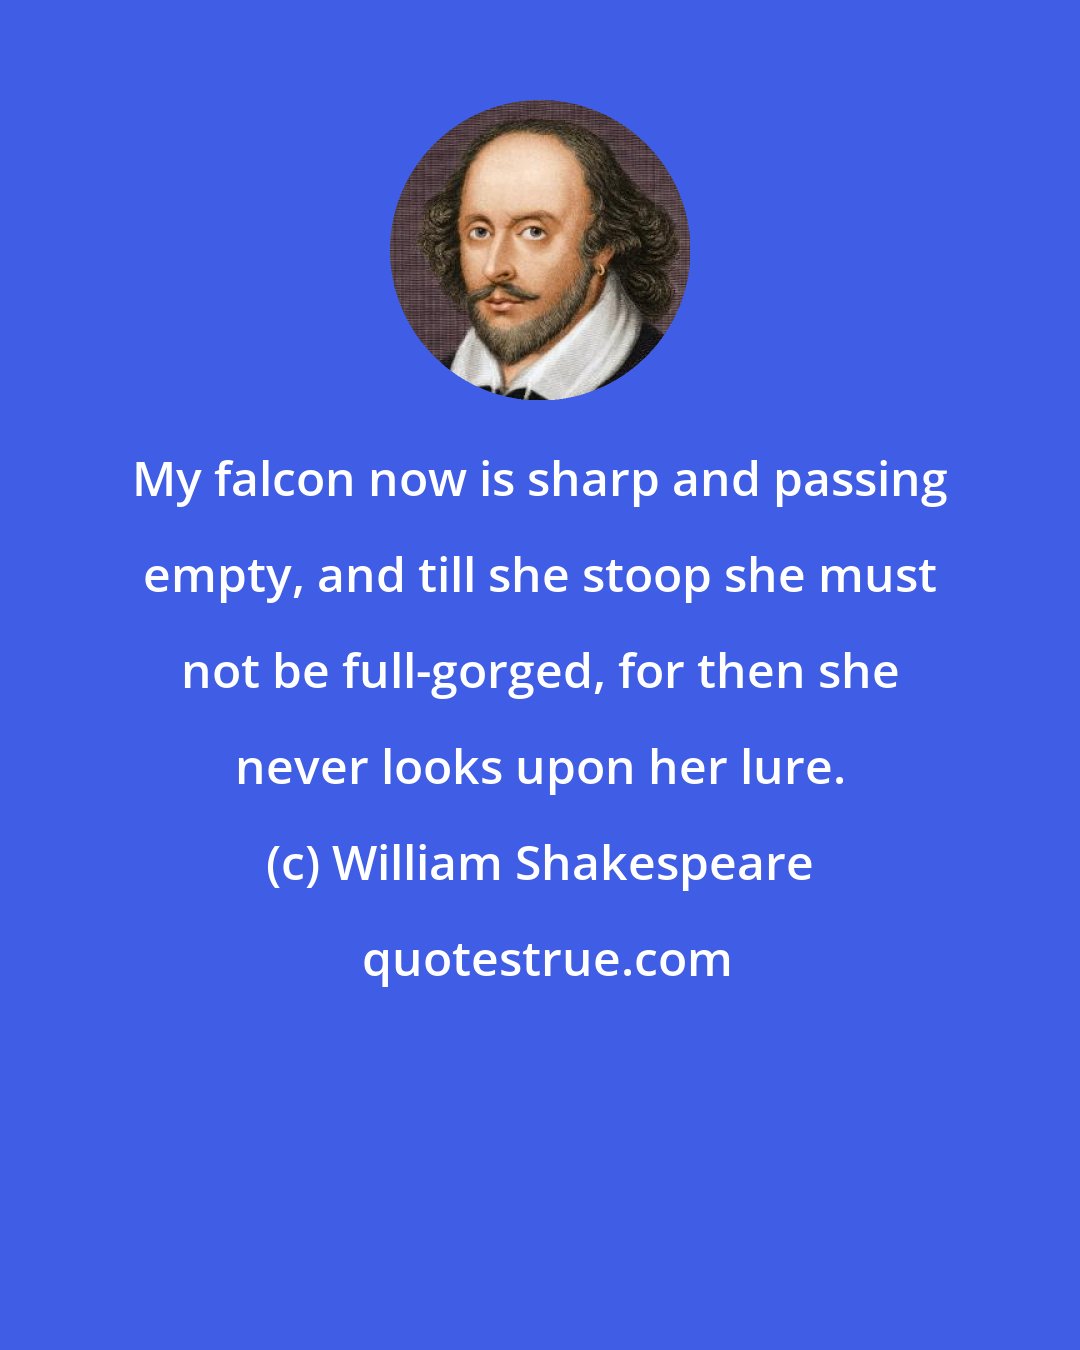 William Shakespeare: My falcon now is sharp and passing empty, and till she stoop she must not be full-gorged, for then she never looks upon her lure.